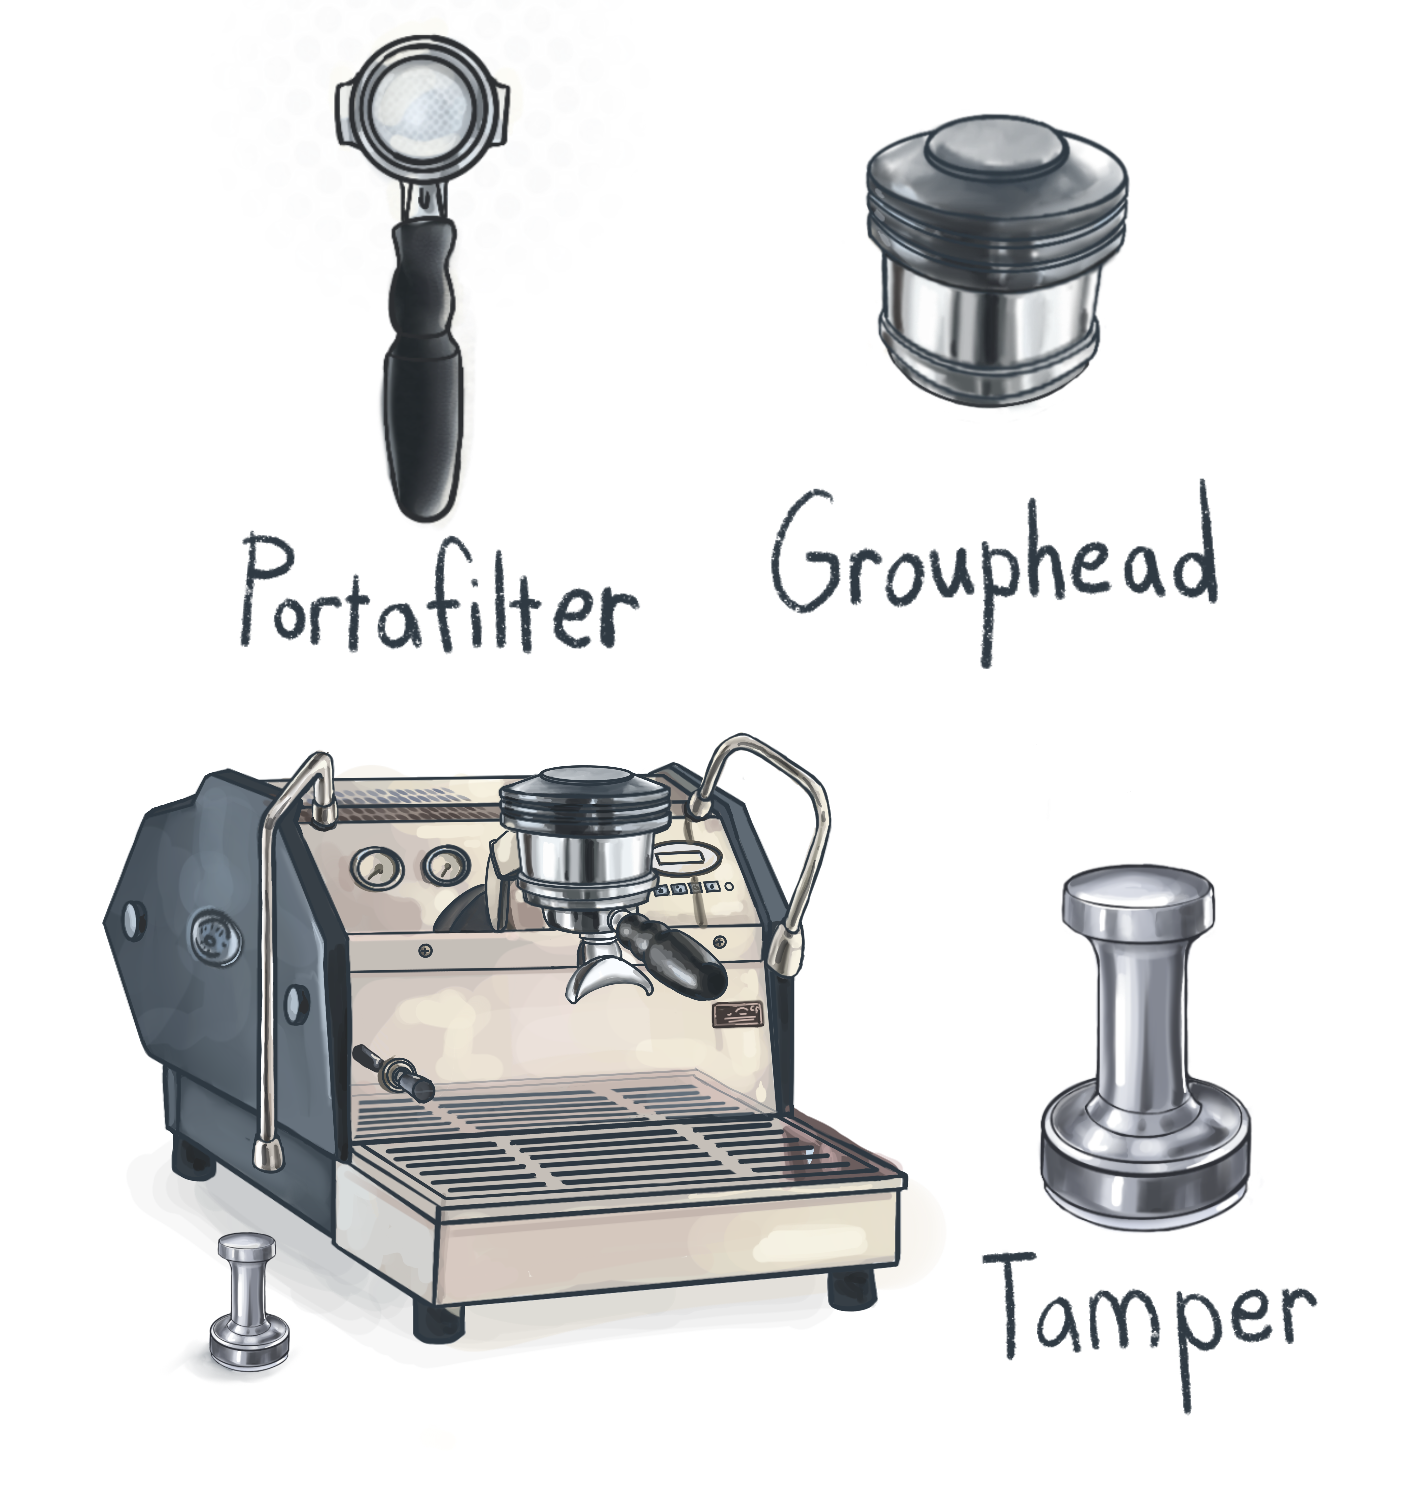 Hand drawn illustration of espresso machine with its parts portafiliter, grouphead and tamper labeled